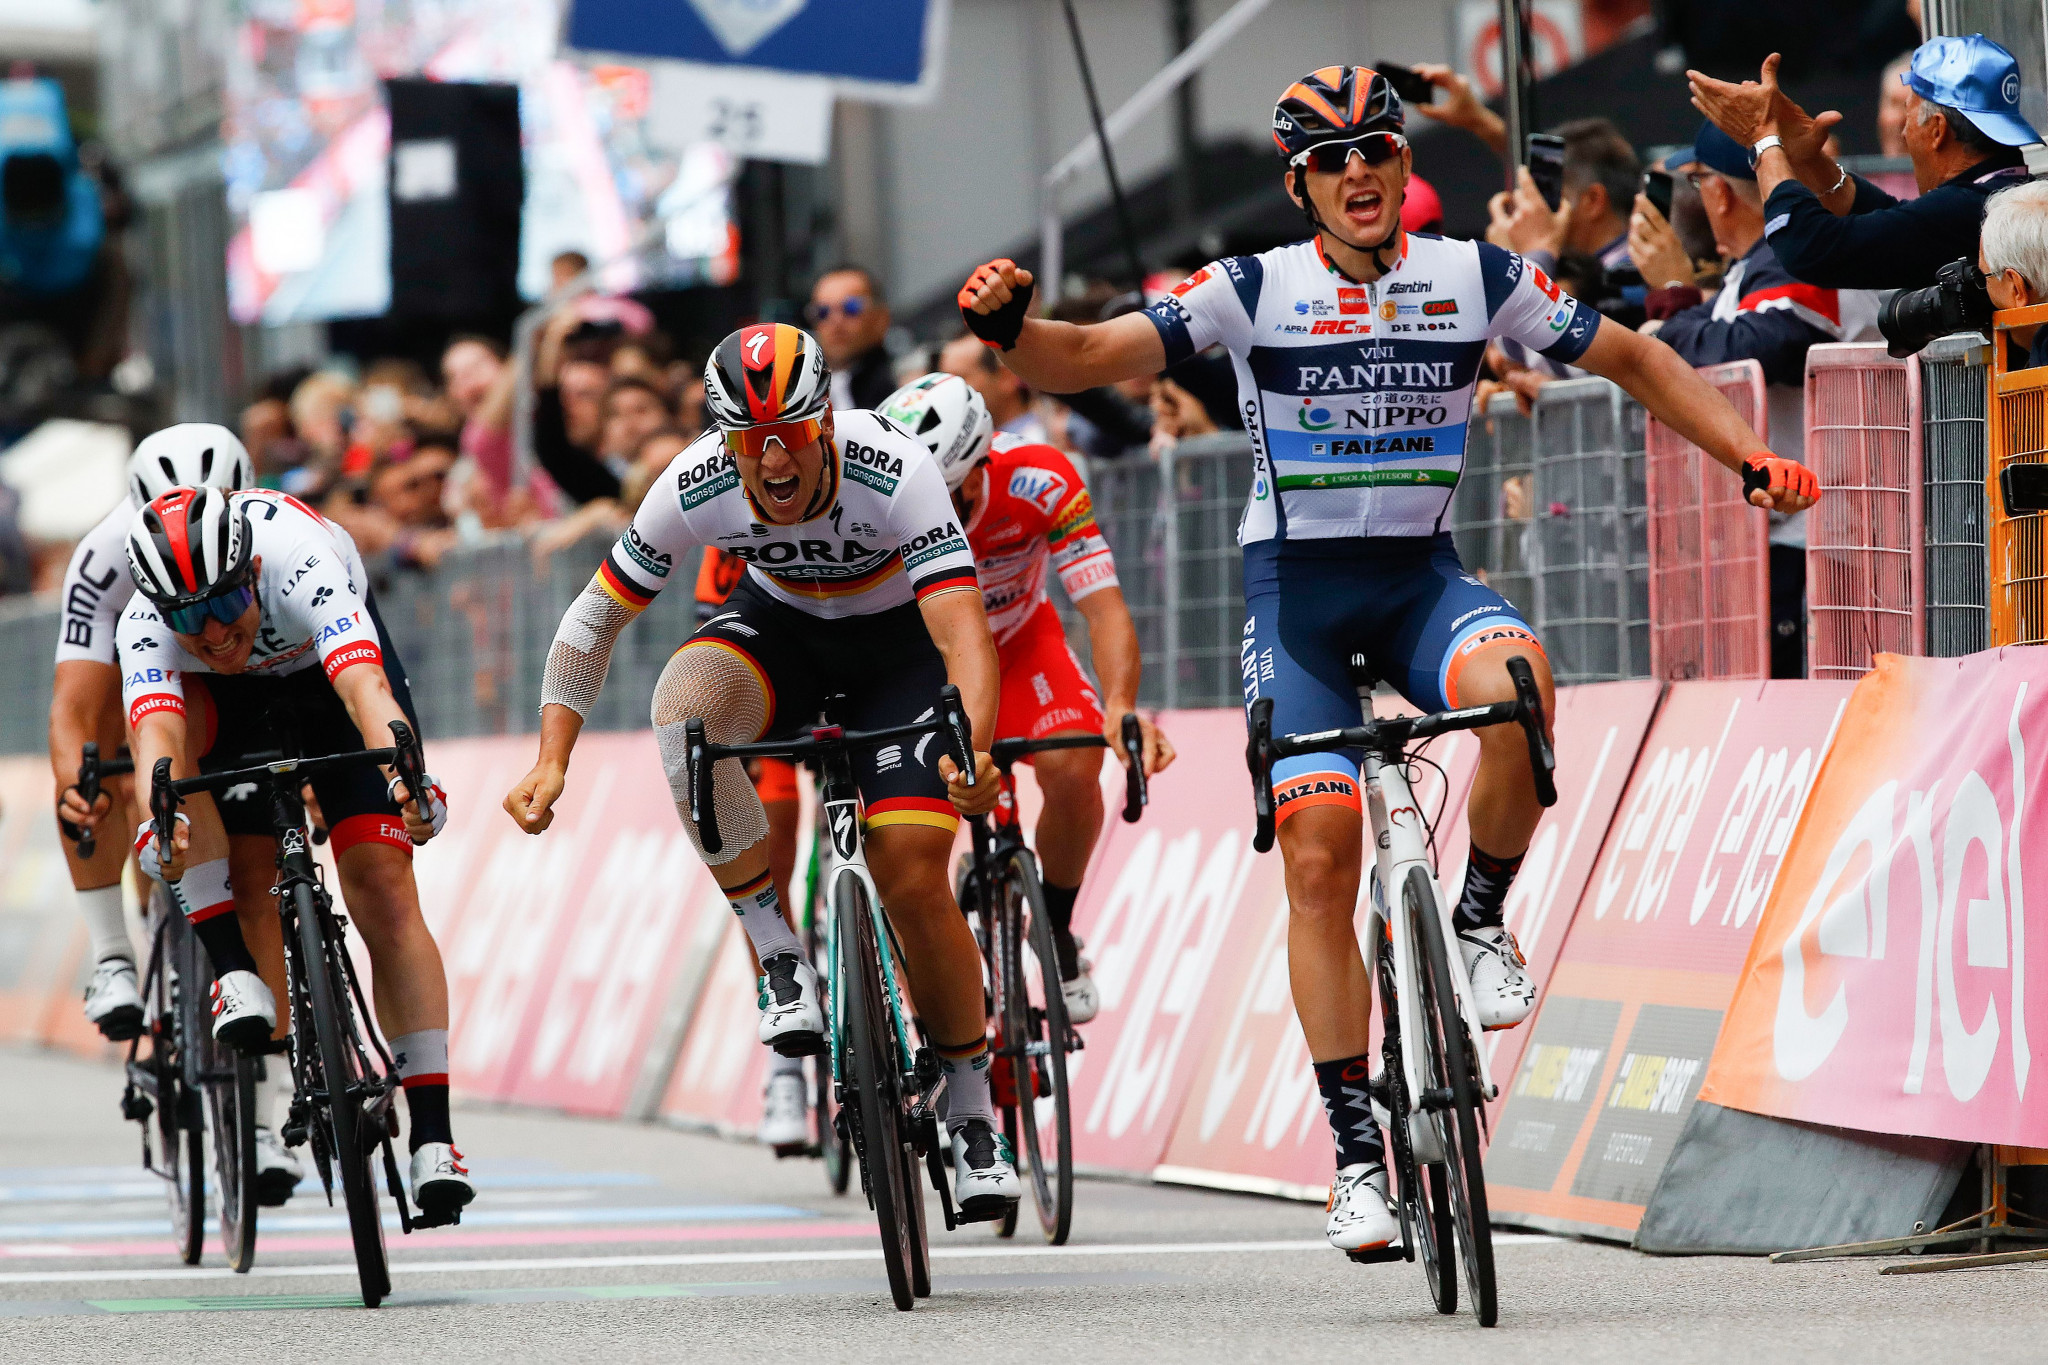 Cima victorious on stage 18 of Giro d'Italia as Carapaz keeps hold of general classification lead